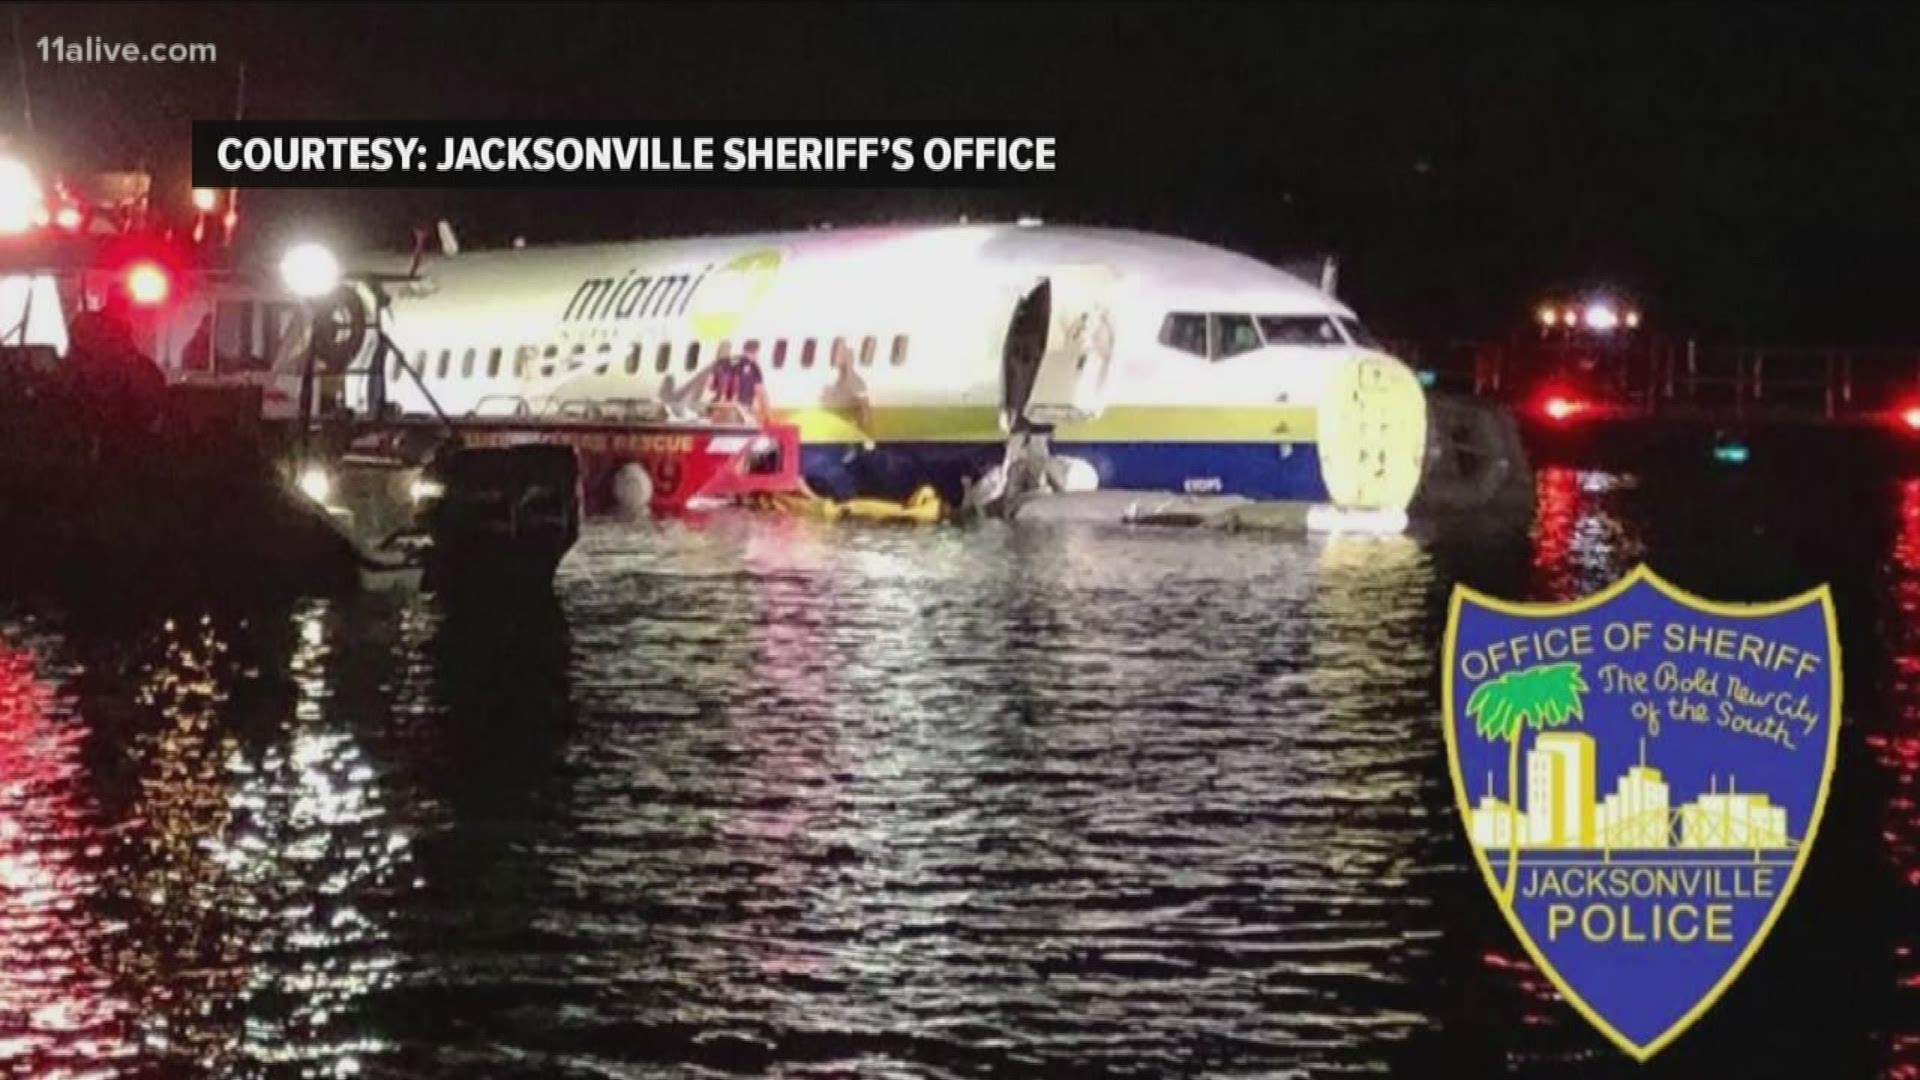 An aircraft with 137 passengers and seven crew members went off the runway and into the St. Johns River near the NAS Jax airport Friday night.